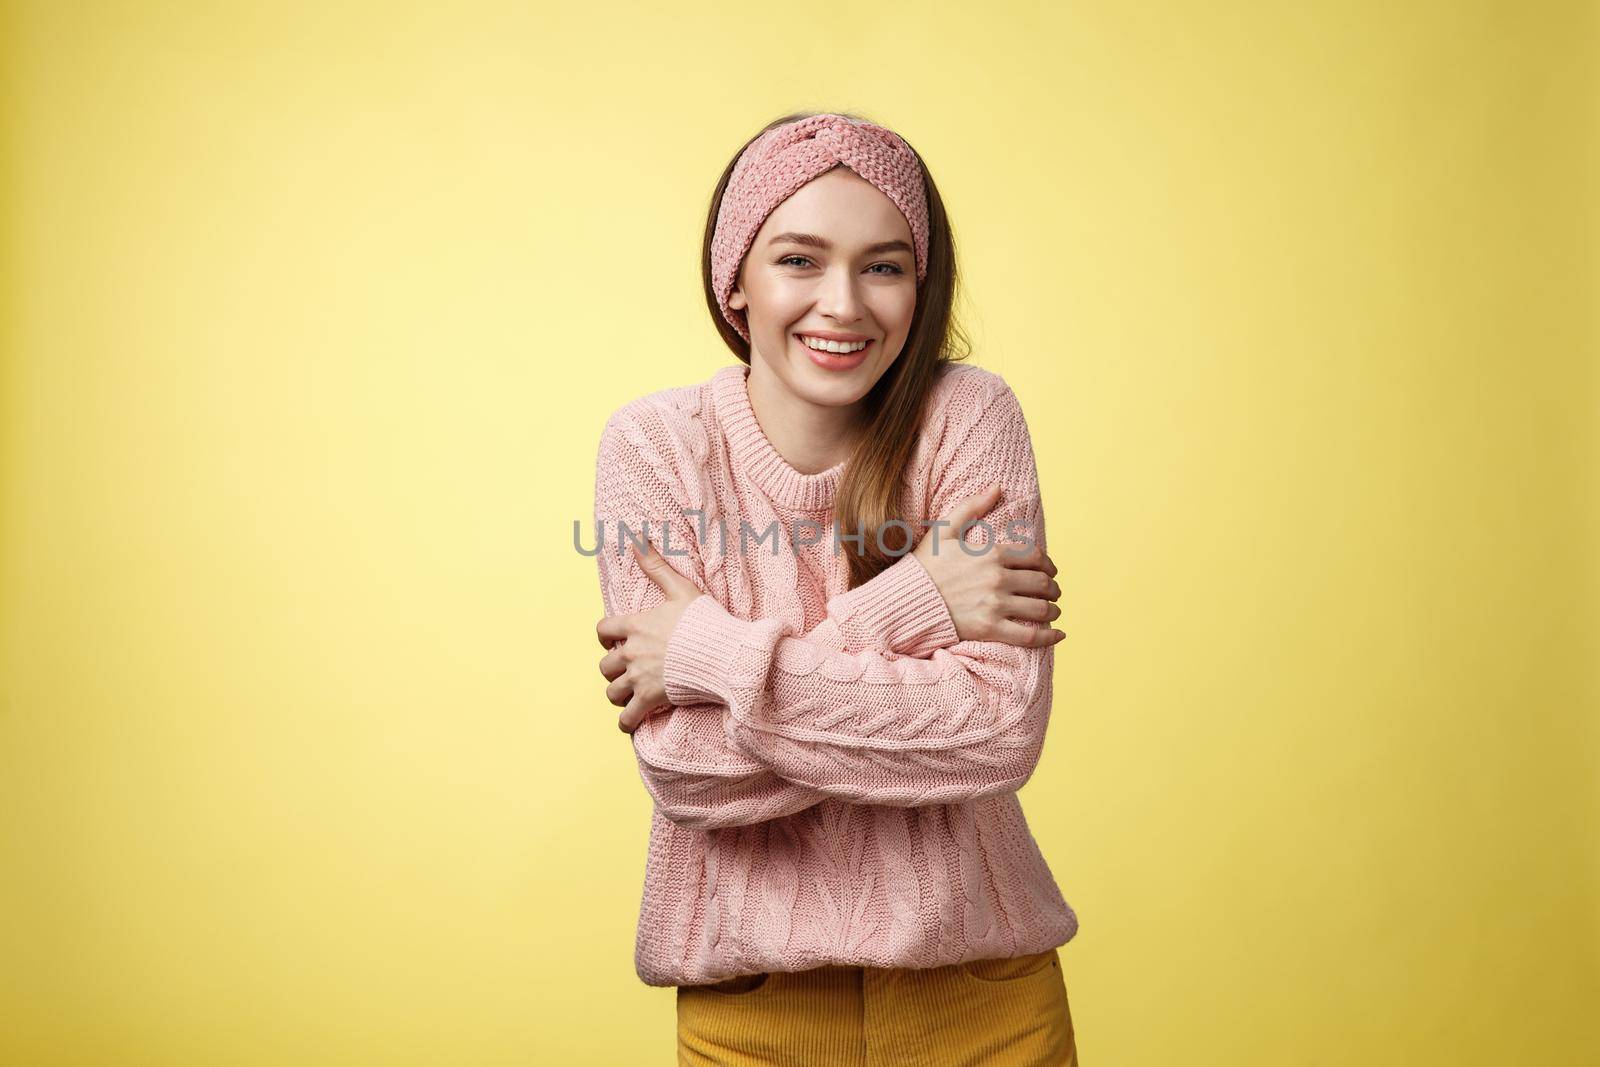 Getting chilly, better put on coat. Charming cute young tender european woman wearing sweater embracing body cross arms over chest, hugging herself to warm-up feeling cold, trembling, smiling.